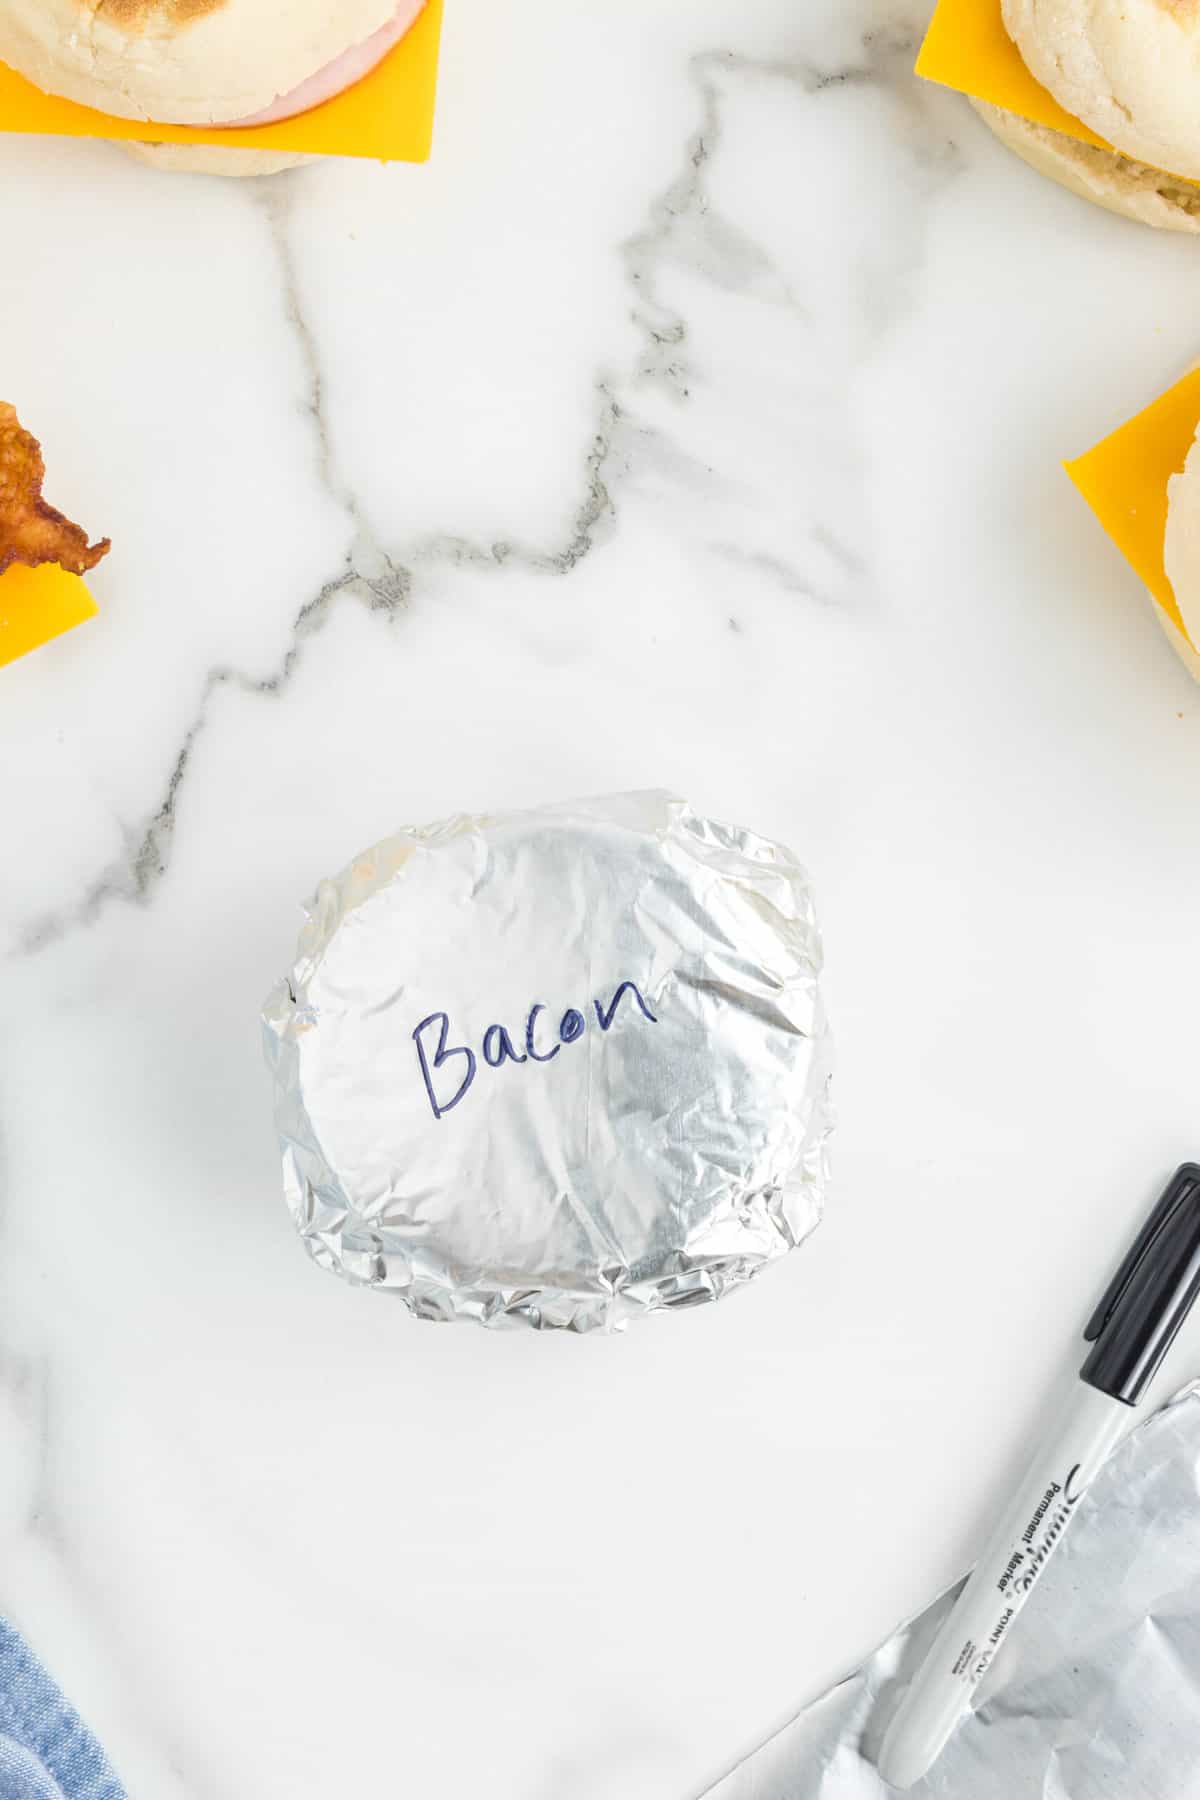 Labeling Tinfoil Make Ahead Breakfast Sandwiches with Sharpie Marker